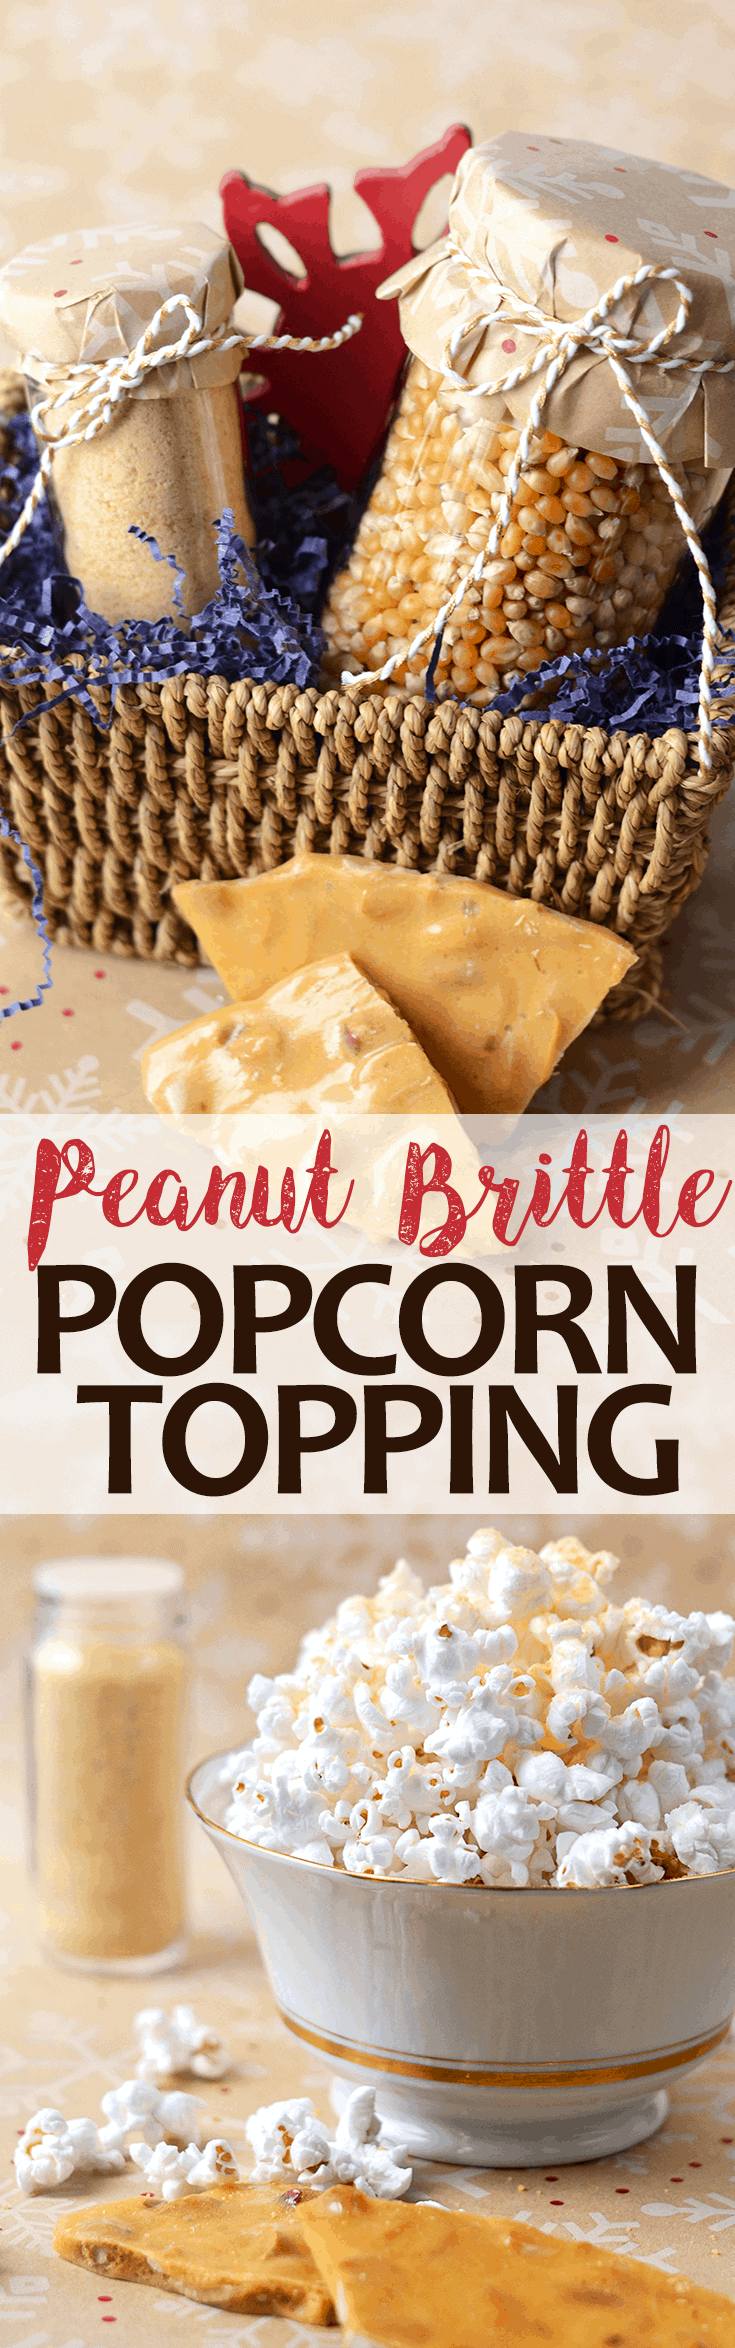 Peanut Brittle Popcorn Topping Pin - Peanut Brittle Popcorn Topping